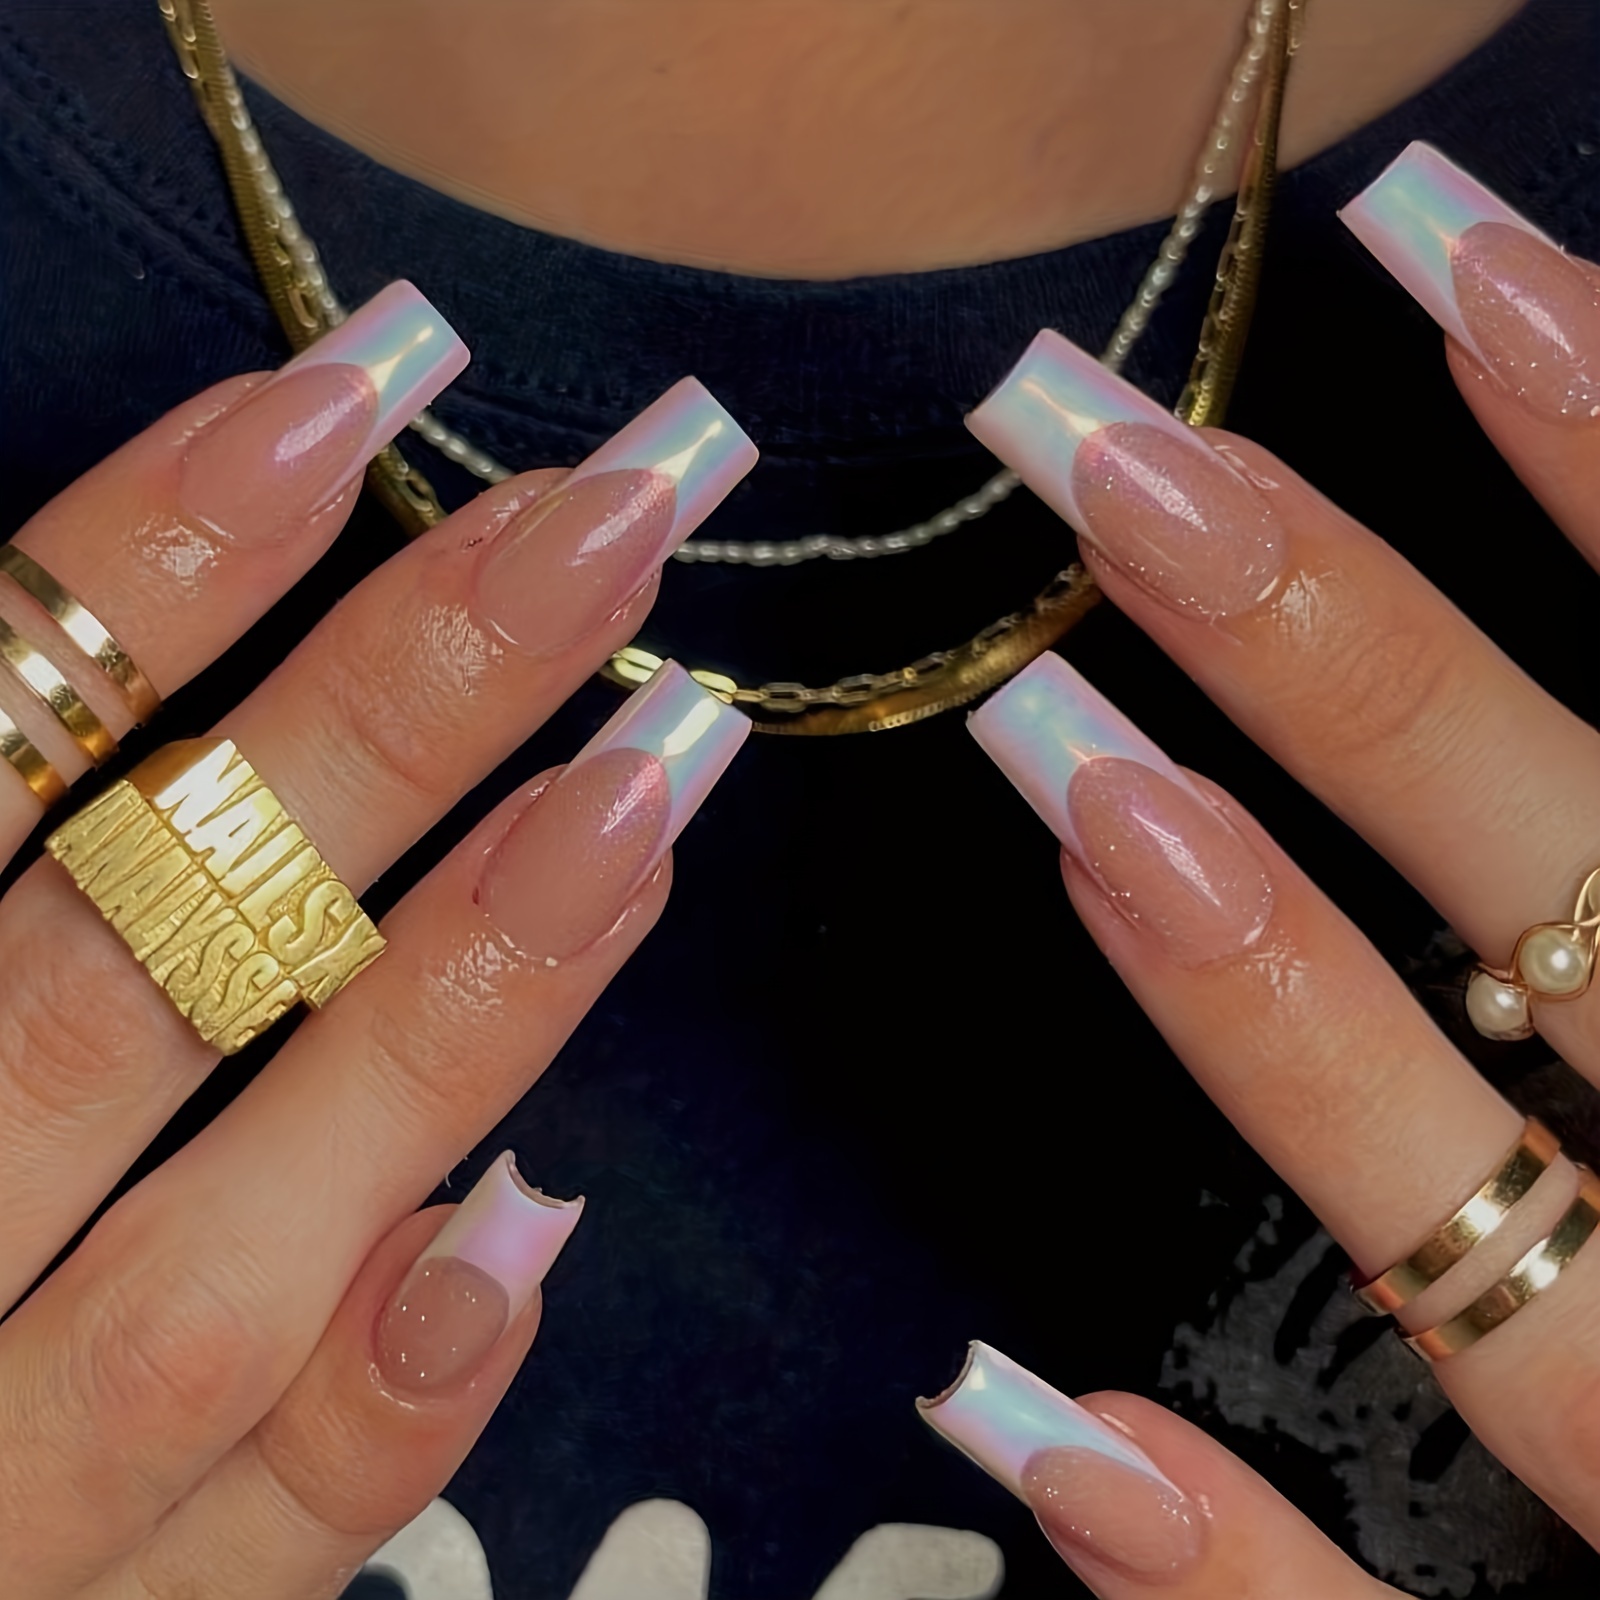 12 Ways to Wear Coffin Shaped Nails — Design Ideas for Ballerina Nails